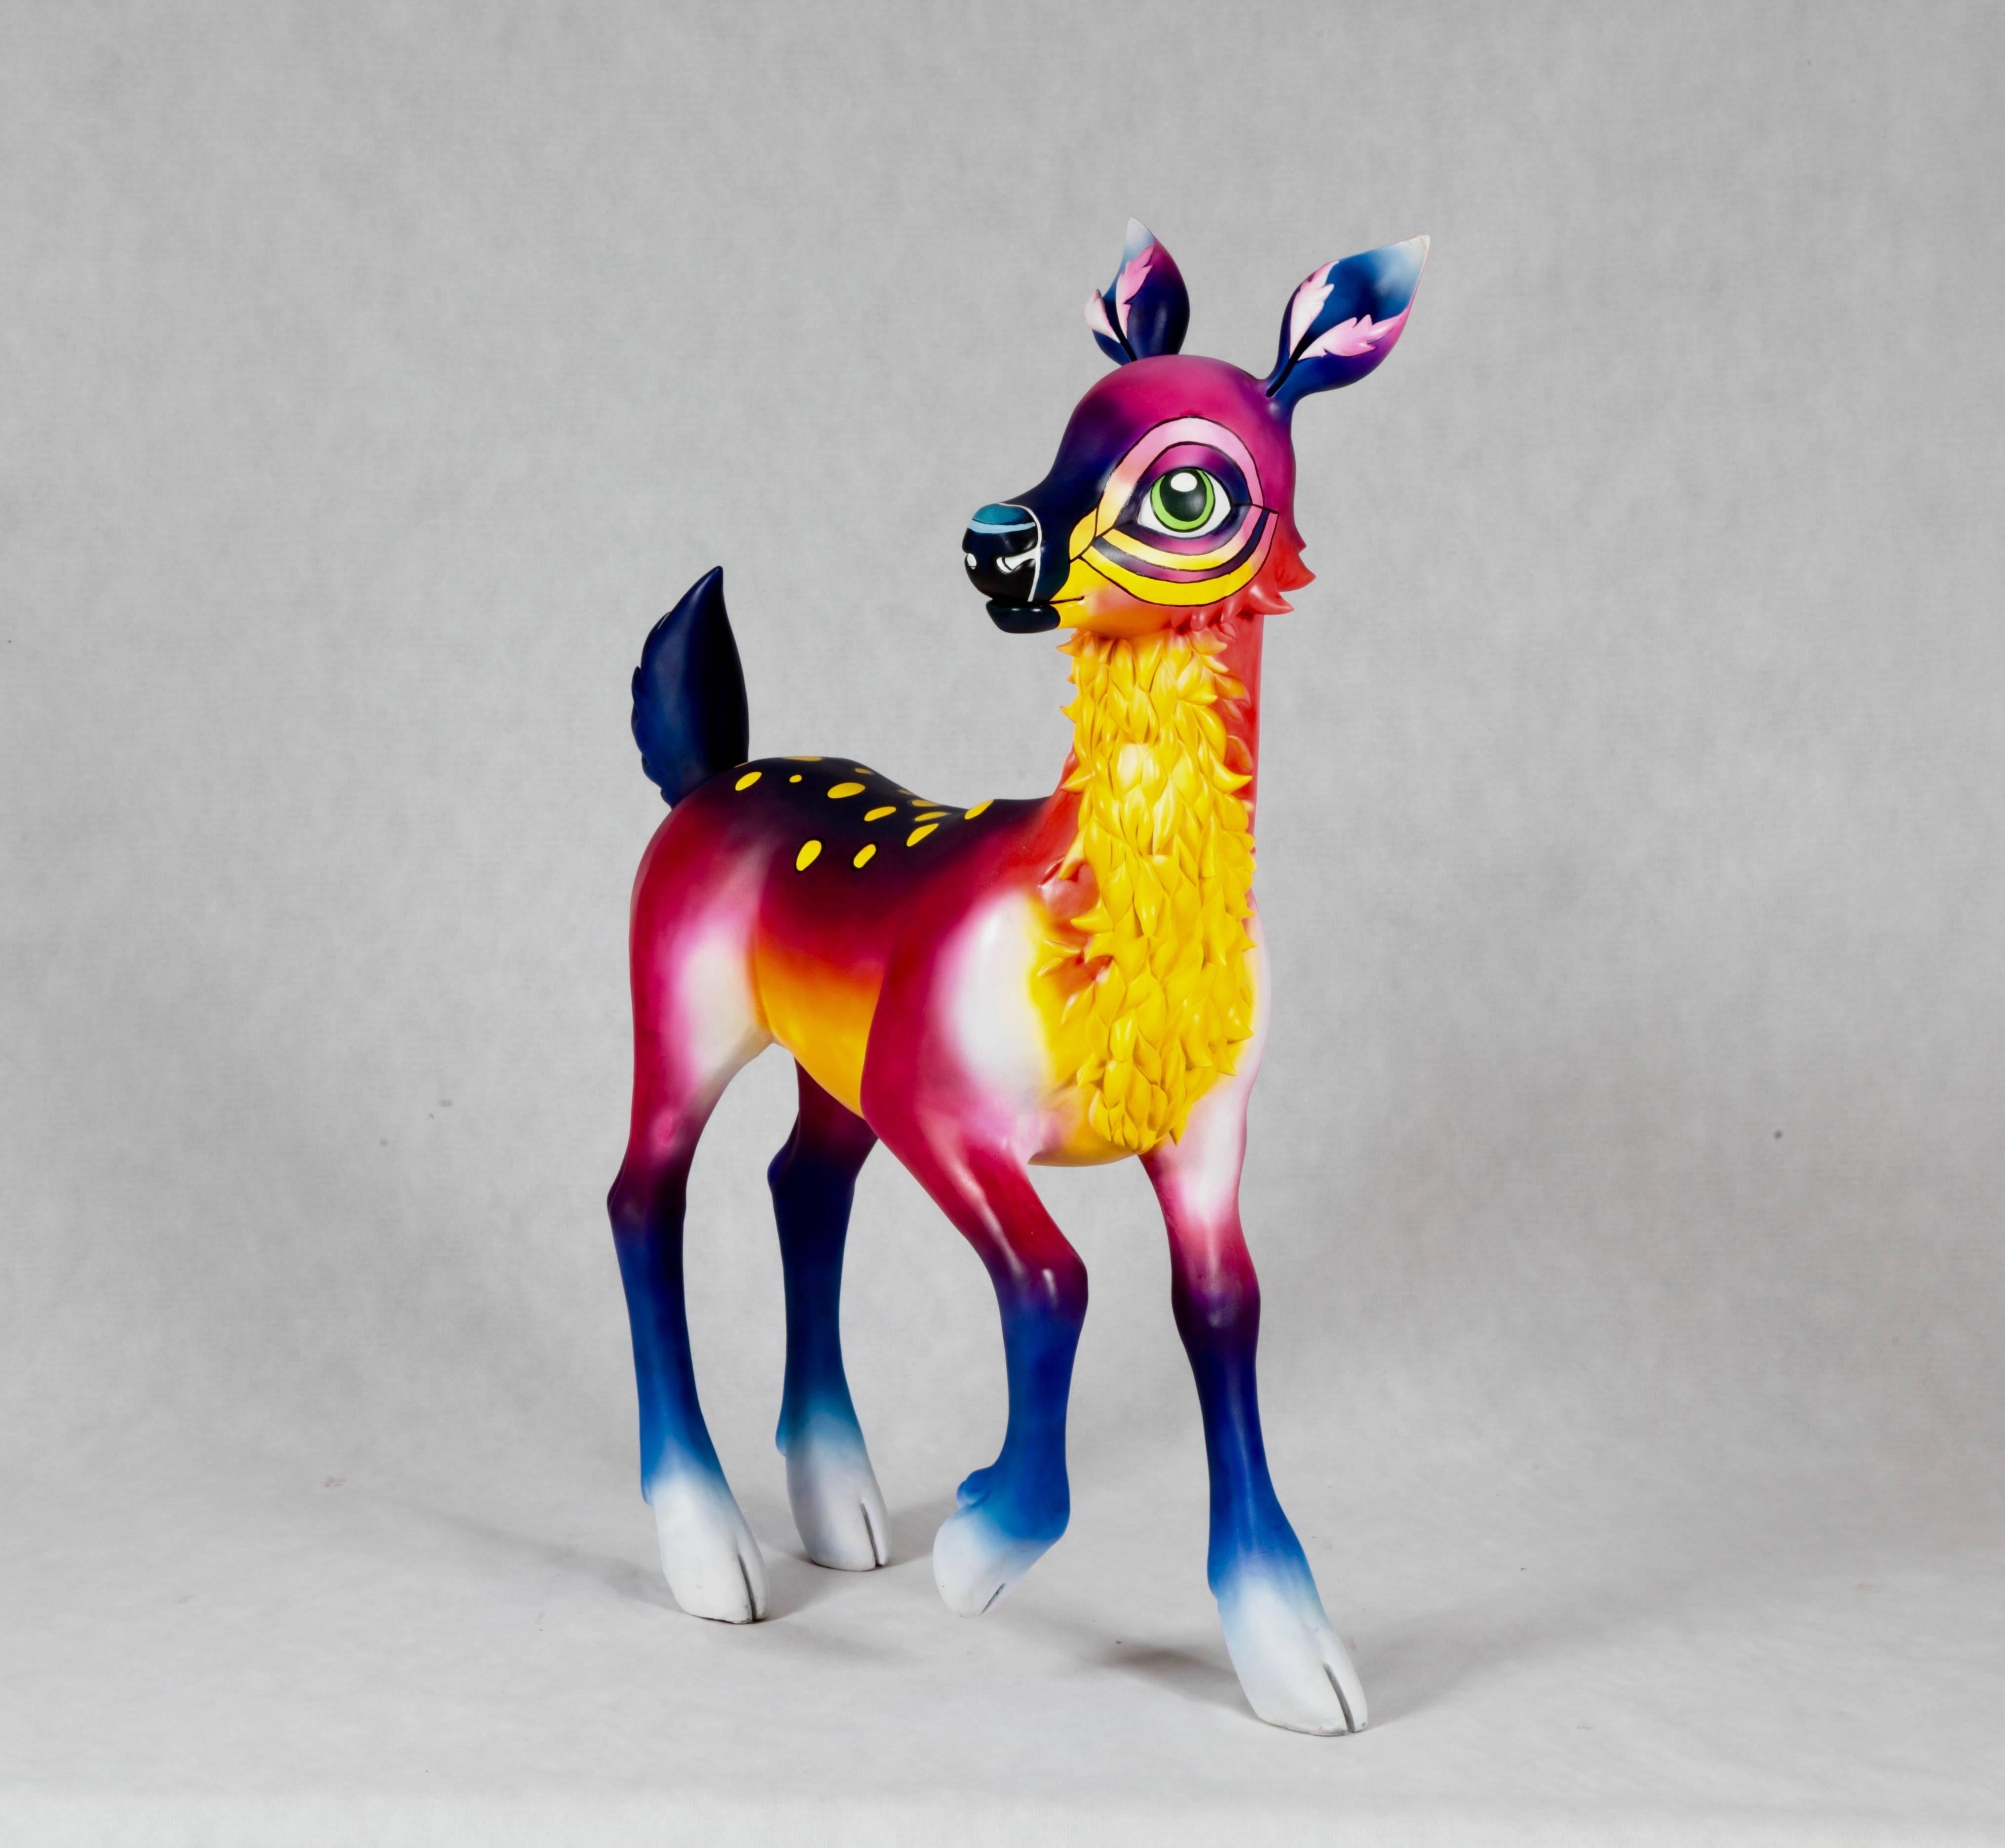 A fibreglass resin sculpture made by 3D model maker Sally Charlton and artist Clara Bacou. Sculpted in wet clay, moulded in a silicone, fibreglass jacket mould and cast in fibreglass resin. It is a 3D rendition of the anthropomorphic deer character